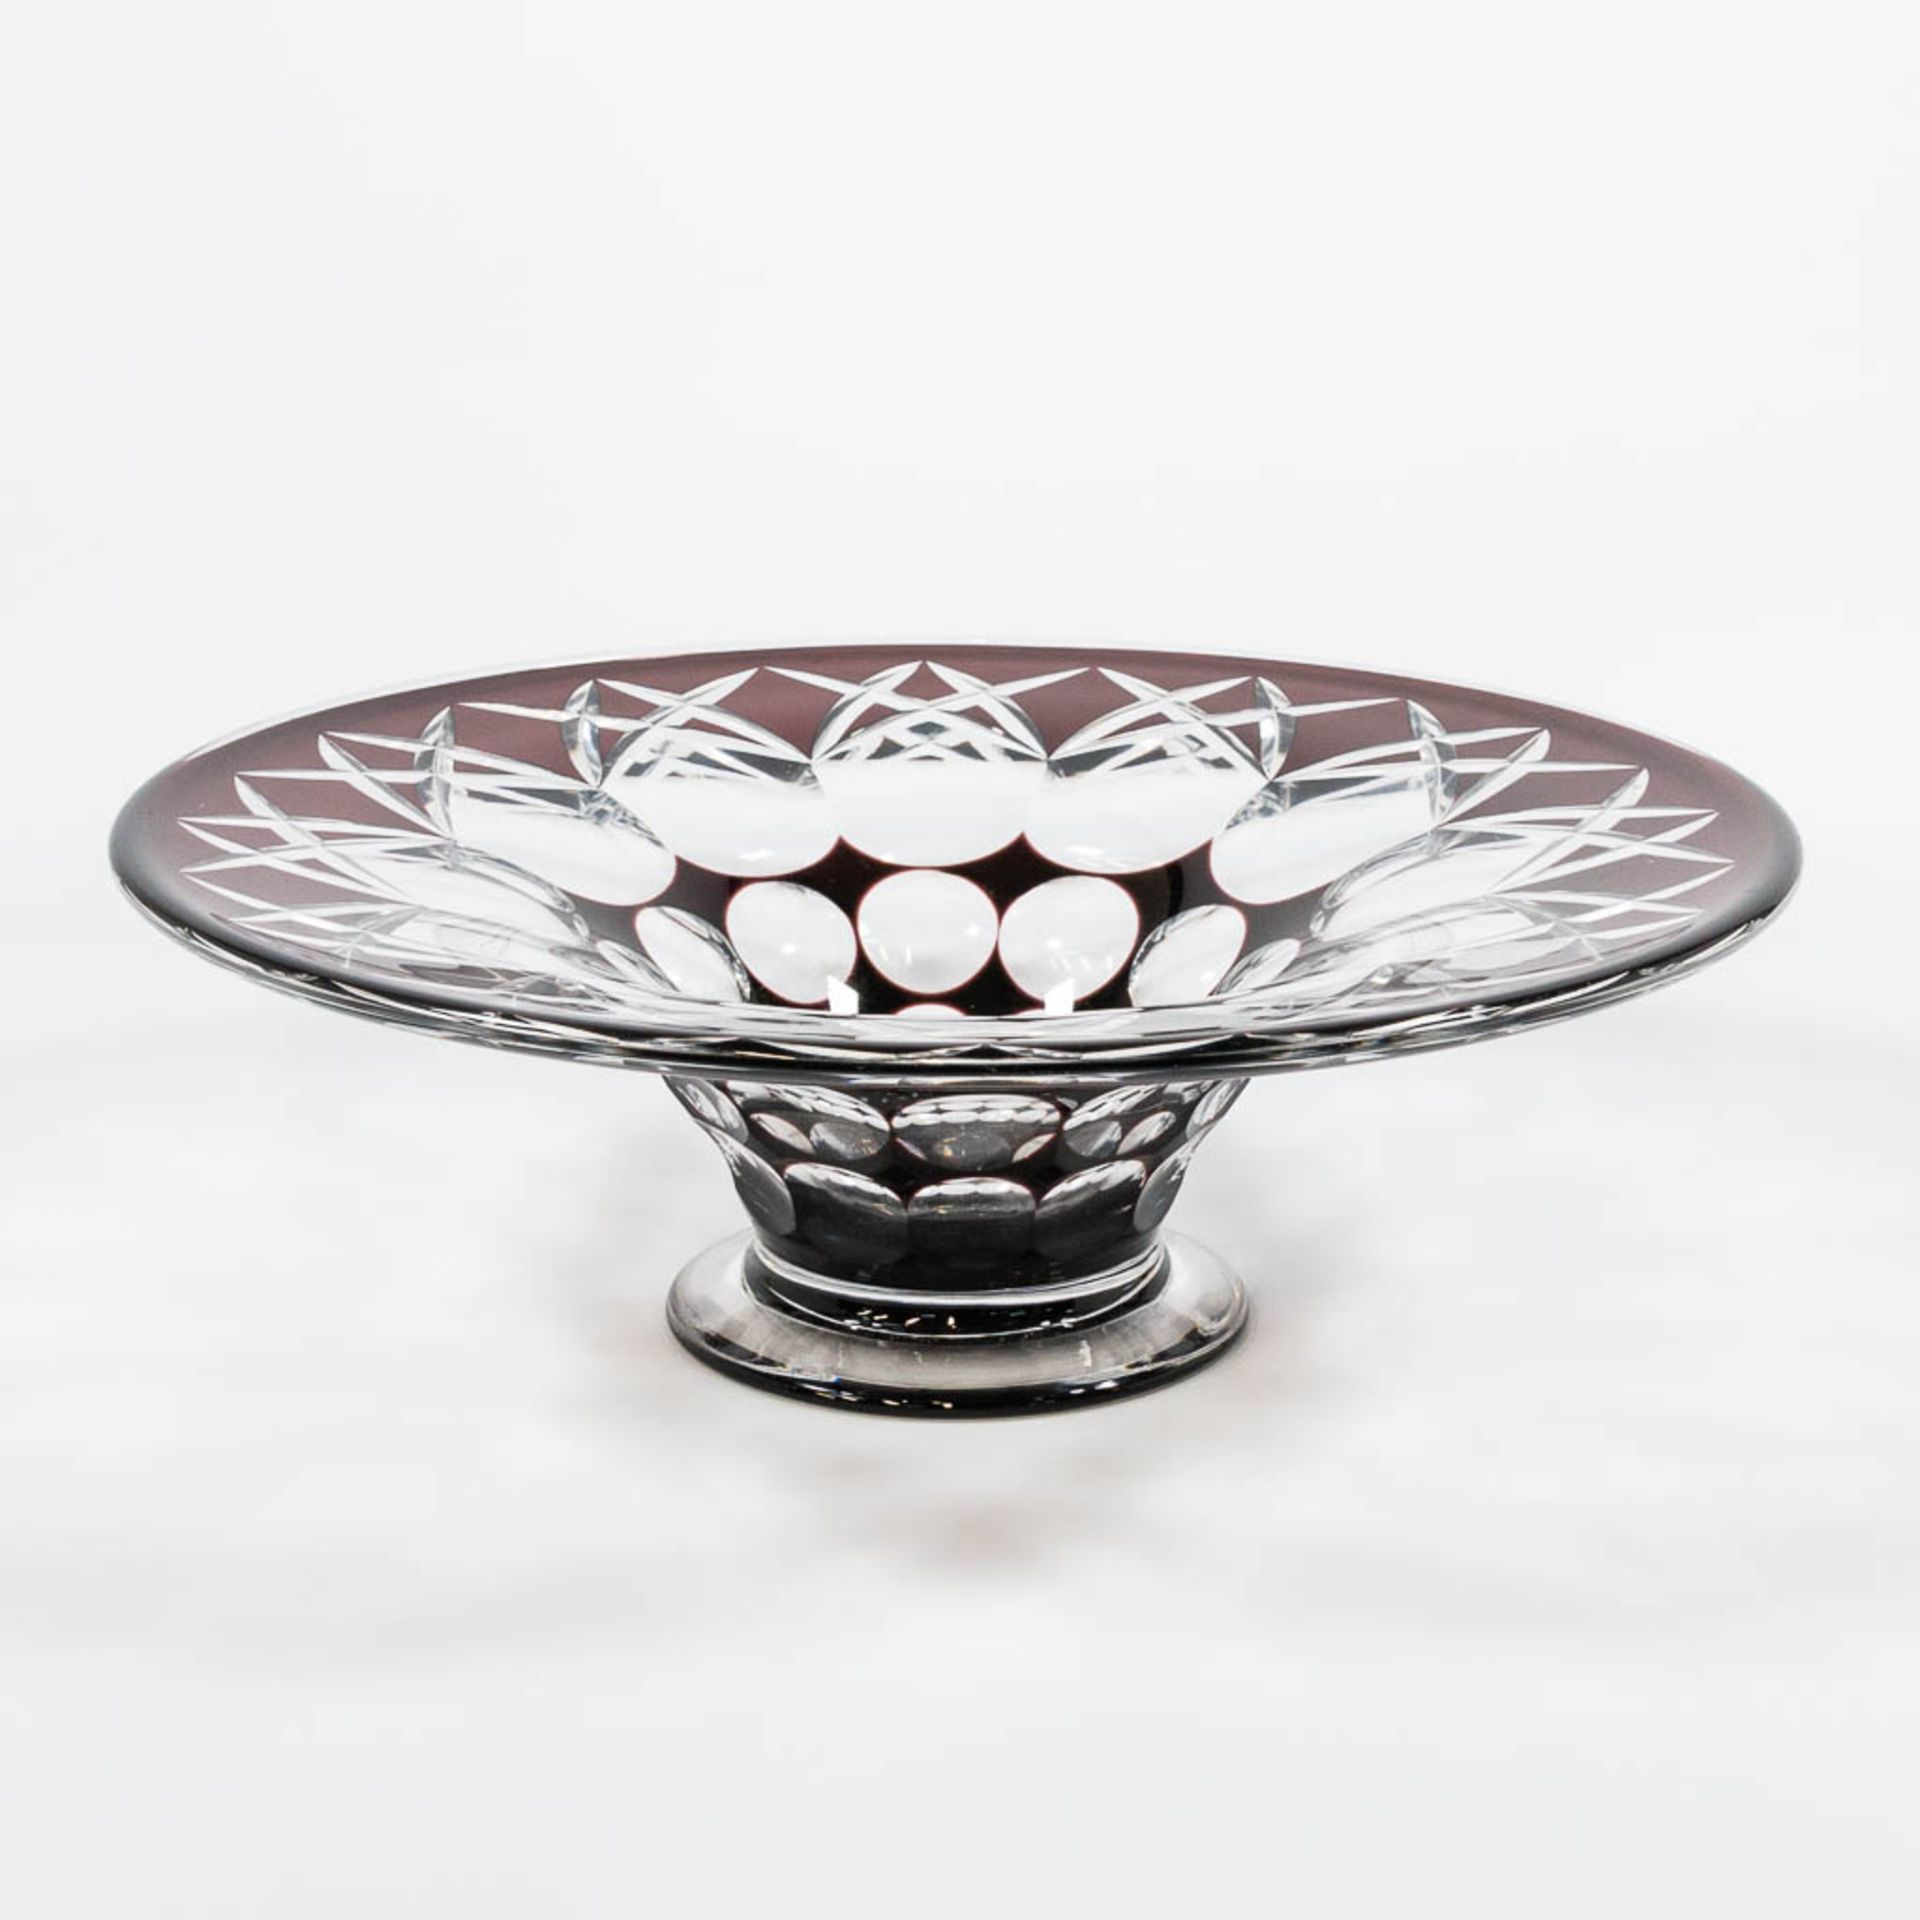 A hand-made Val Saint Lambert fruit bowl Clear and brown crystal, marked with sticker and signature. - Image 3 of 15